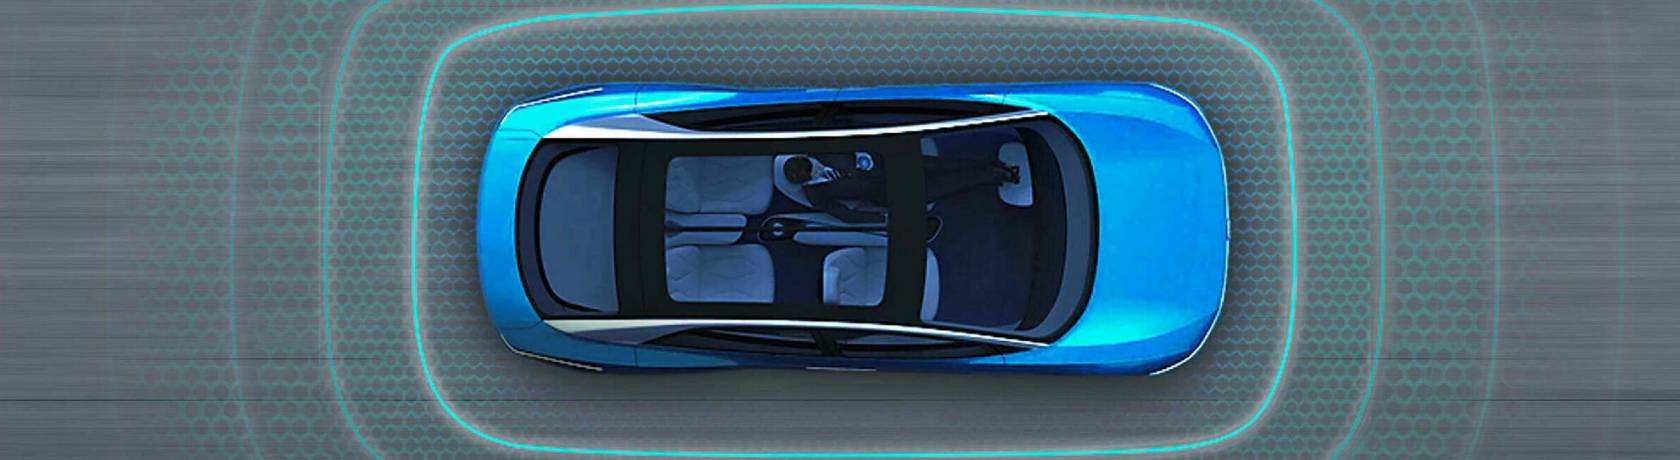 Software and digitalization at the heart of future car development